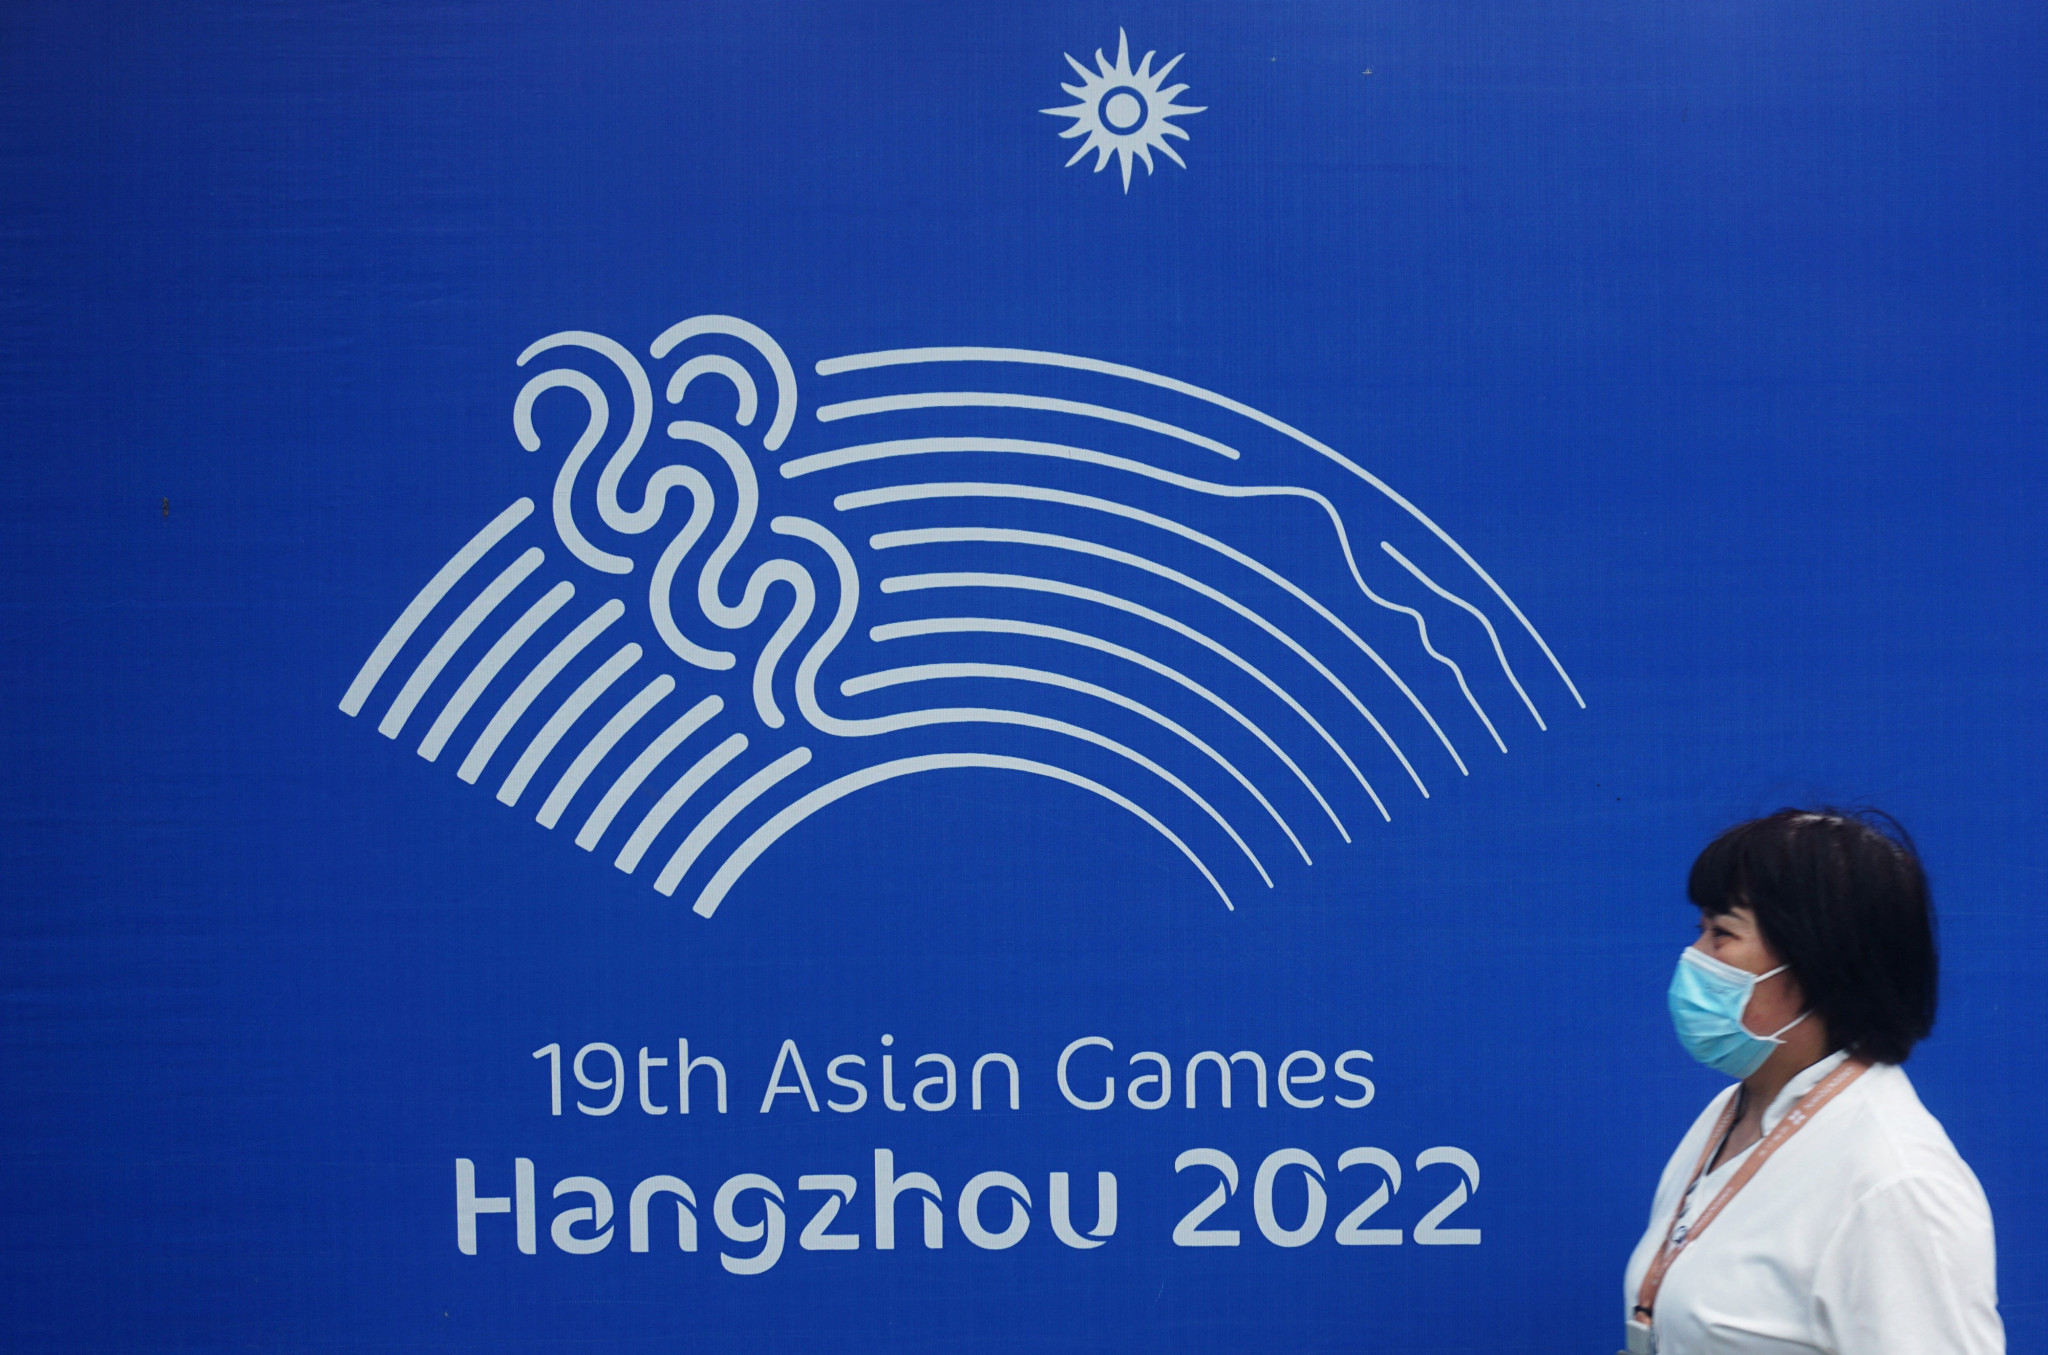 The decision to postpone the Asian Games over COVID-19 concerns was 